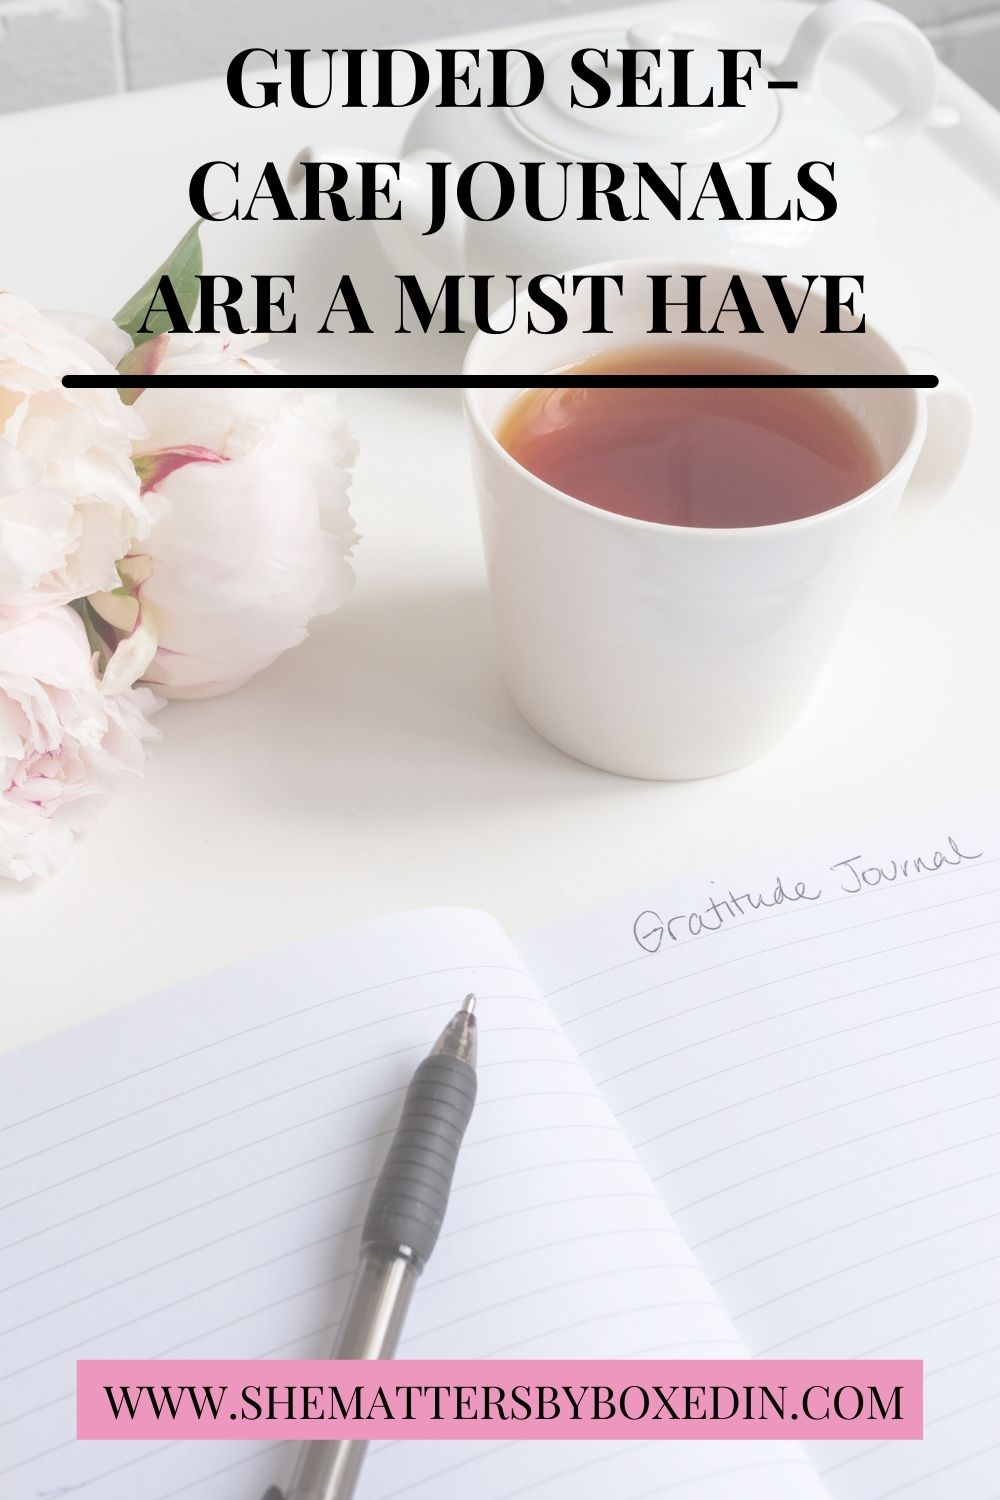 Guided Self-Care Journals Are A Must!